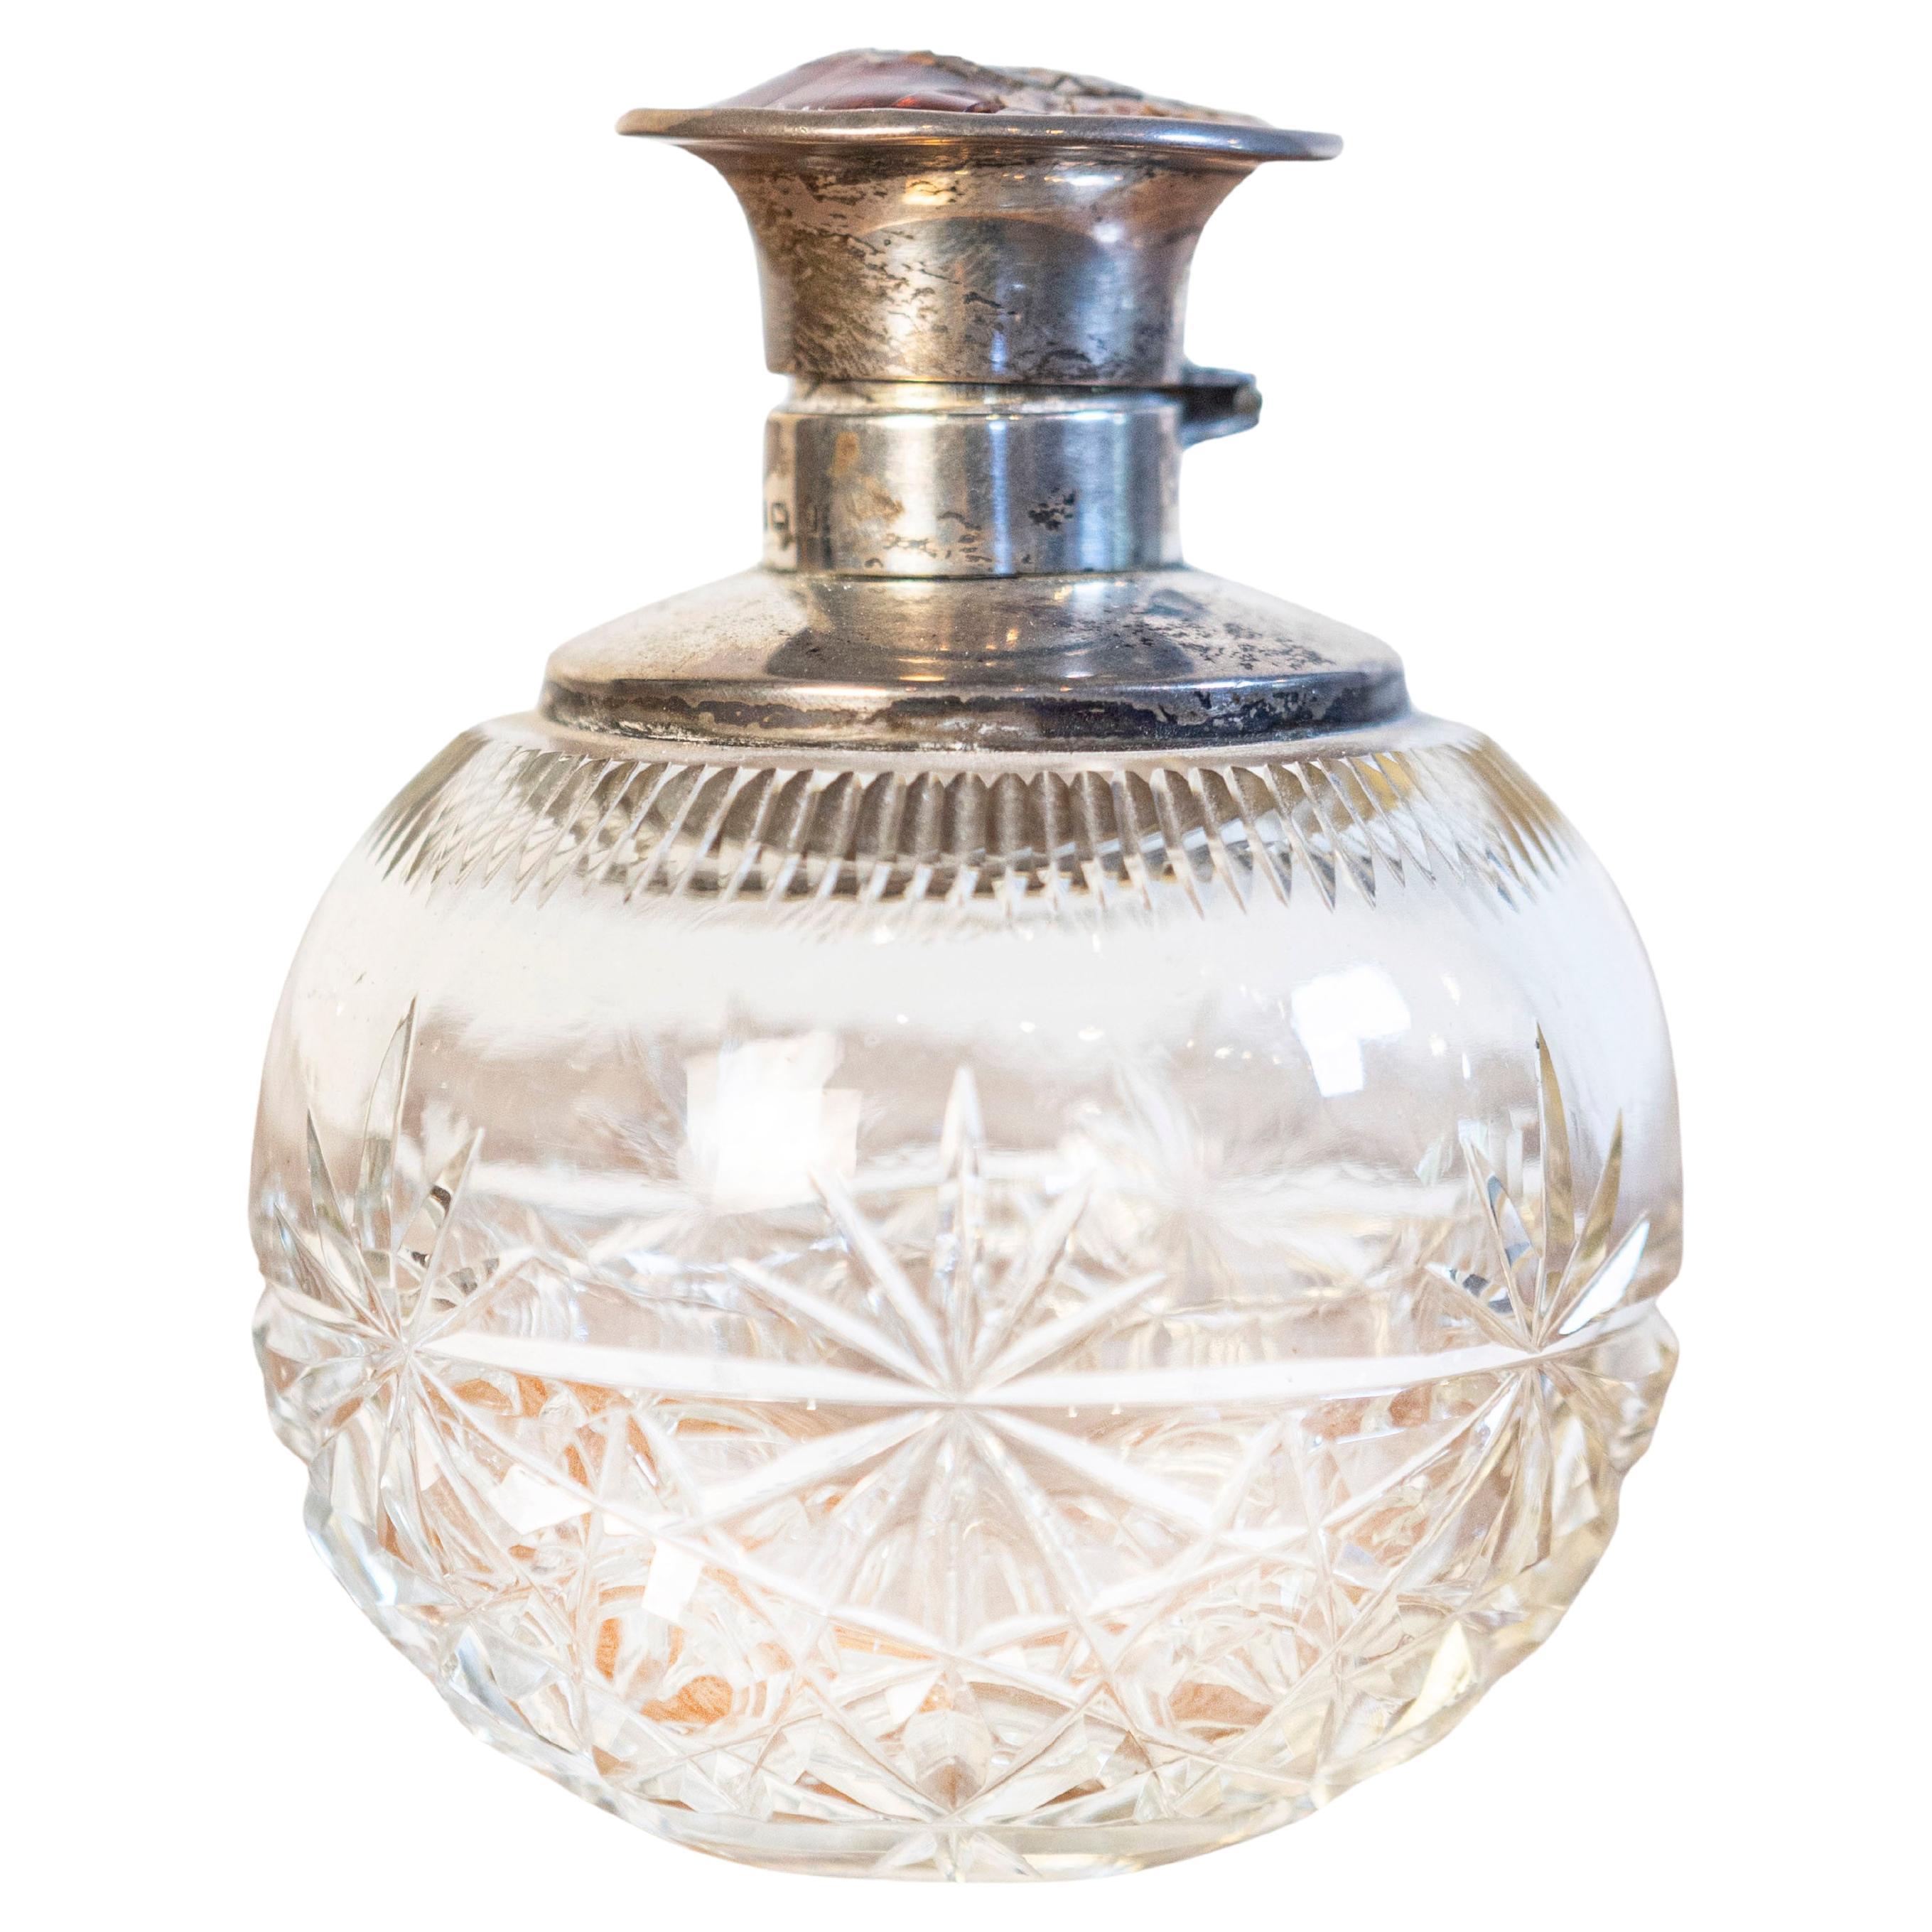 English Victorian Crystal Toiletry Bottle with Silver Lid from the 19th Century